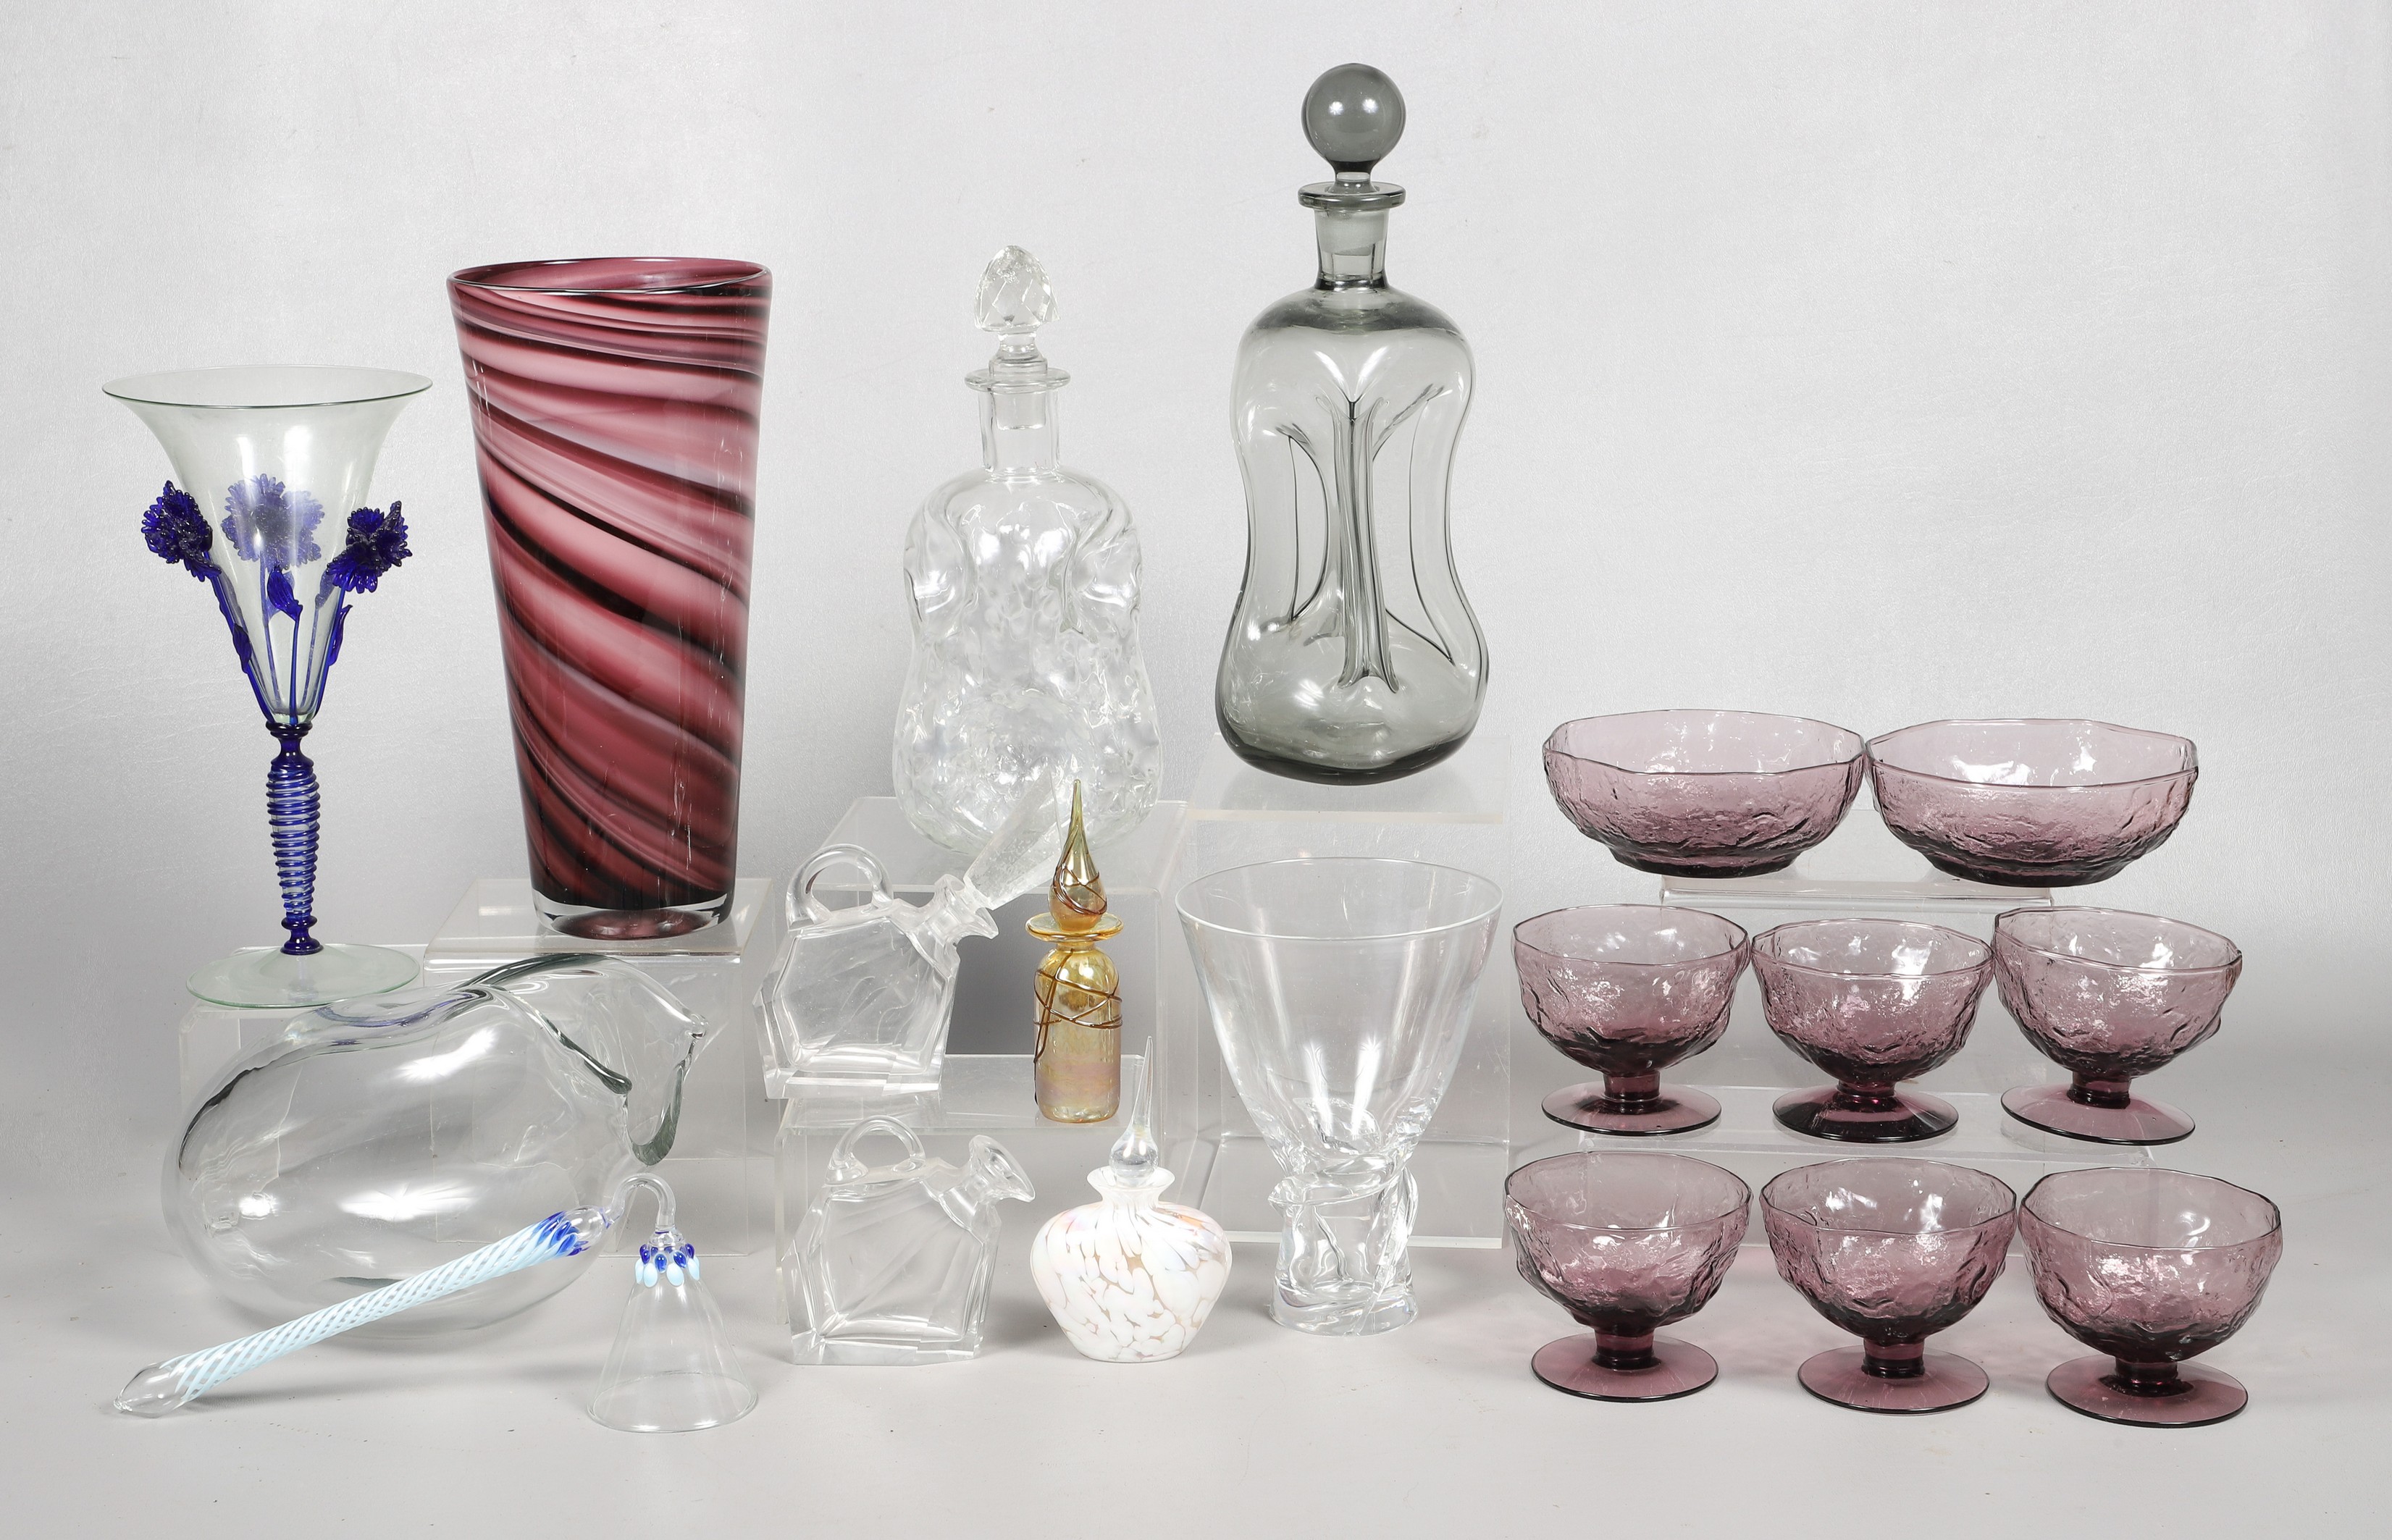 Modern glass decanters, vase, table